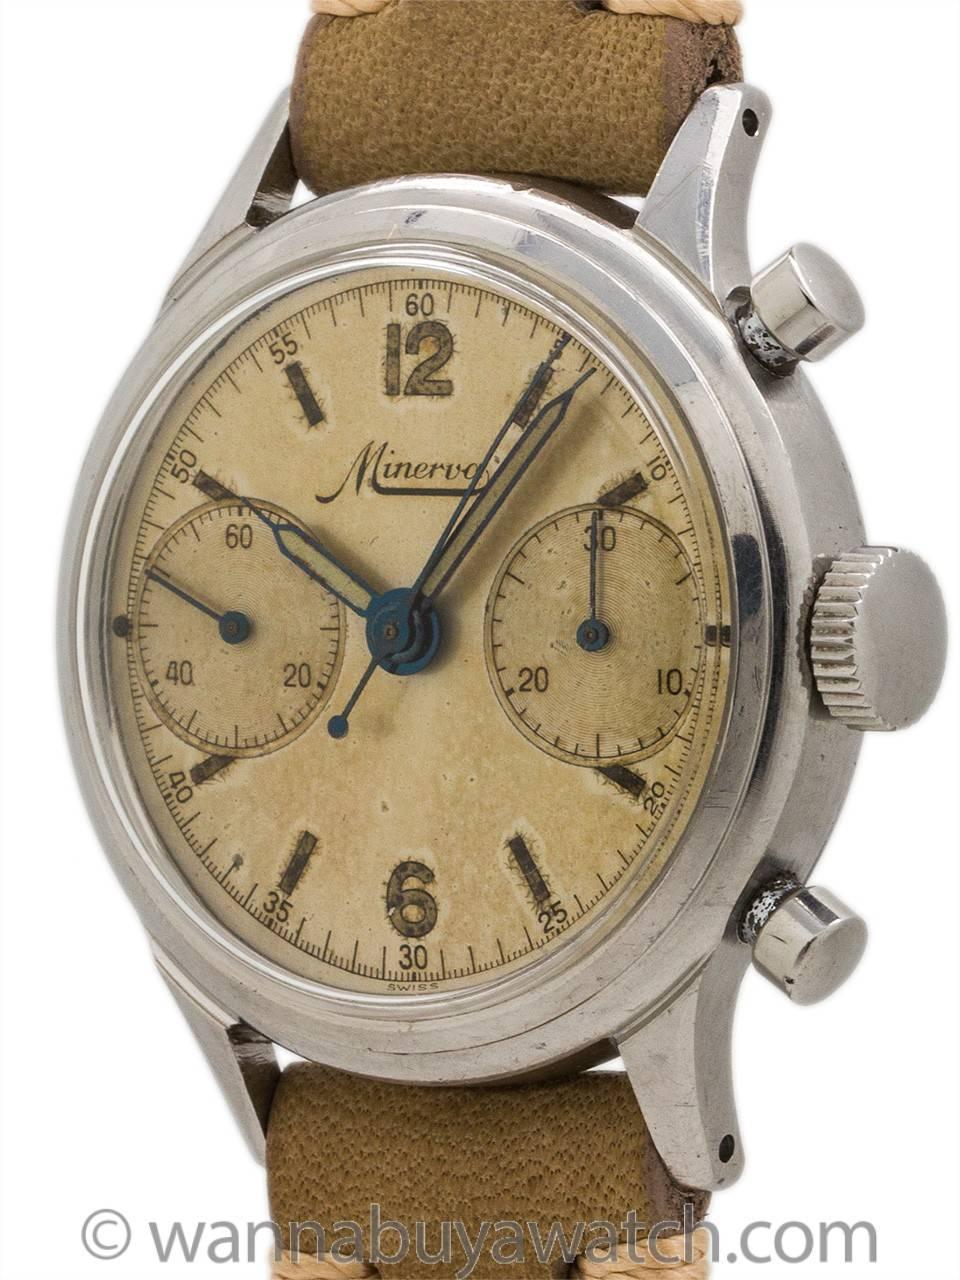 Vintage Minerva chronograph circa 1940’s. Featuring beefy design 34mm case with screw down case back, large round chronograph pushers, wide heavy bezel, and pleasing patina’d original matte silver dial with radium indexes and hands, and with